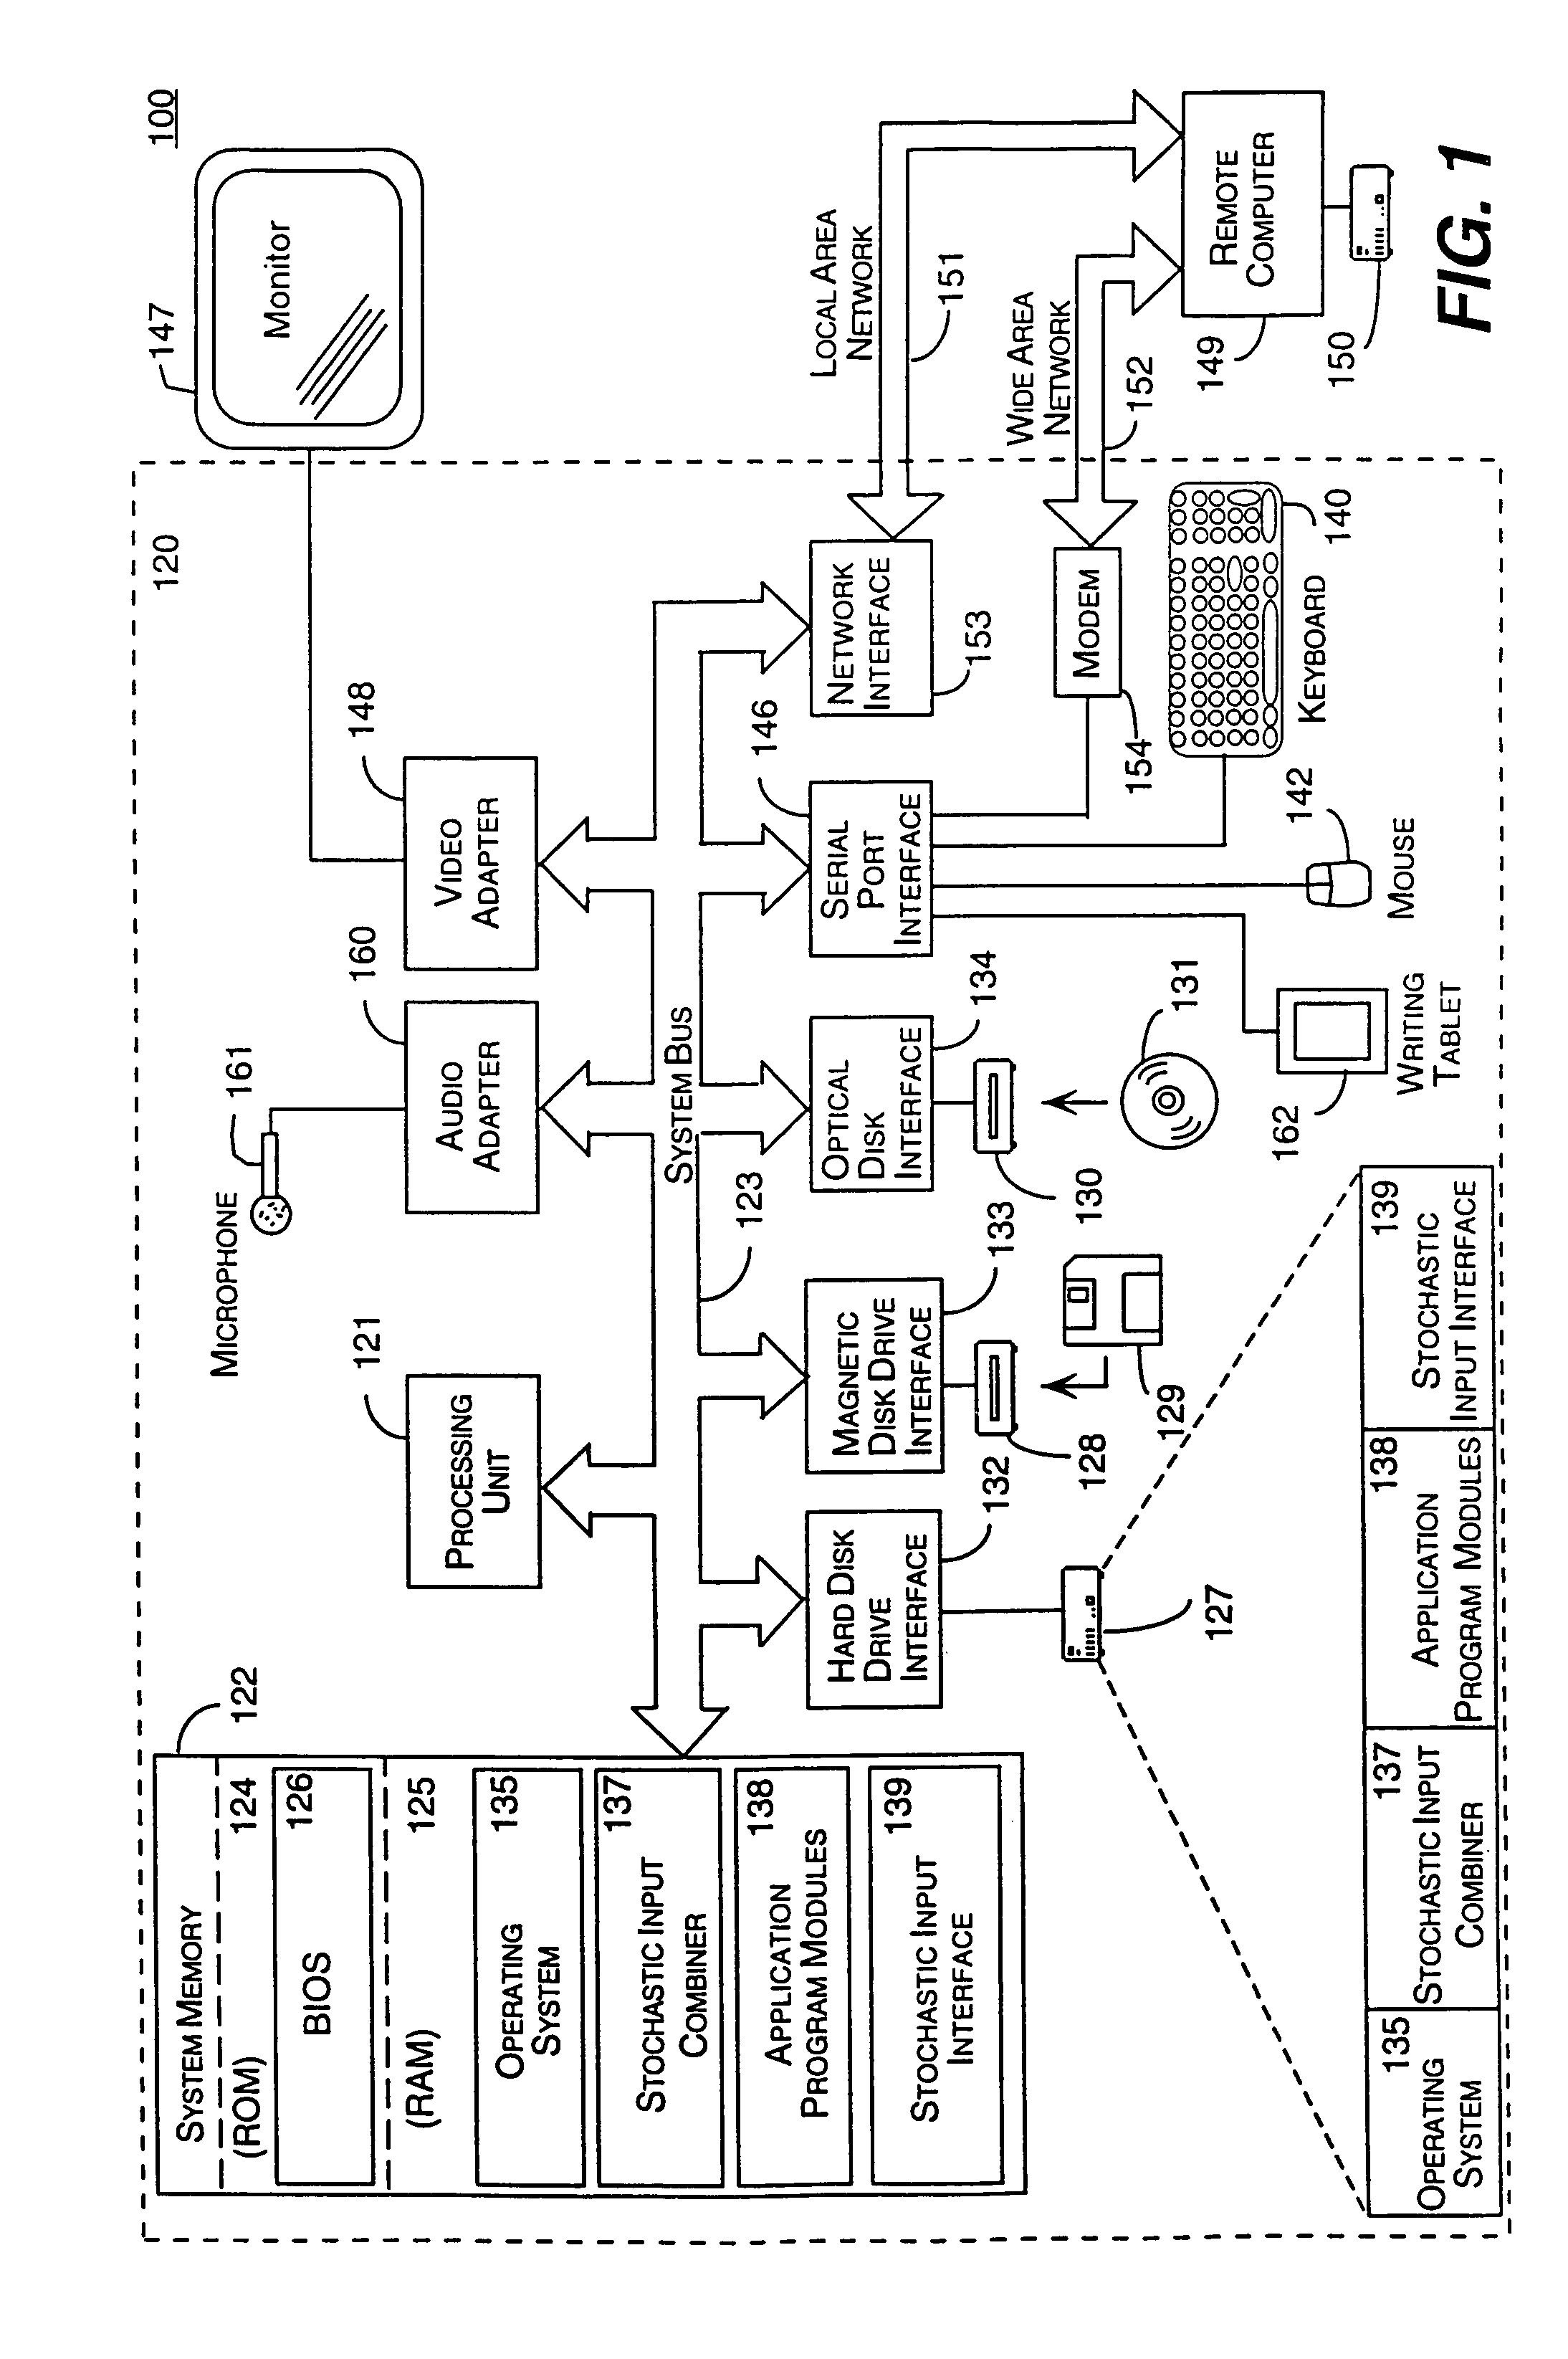 Method and system for providing alternatives for text derived from stochastic input sources